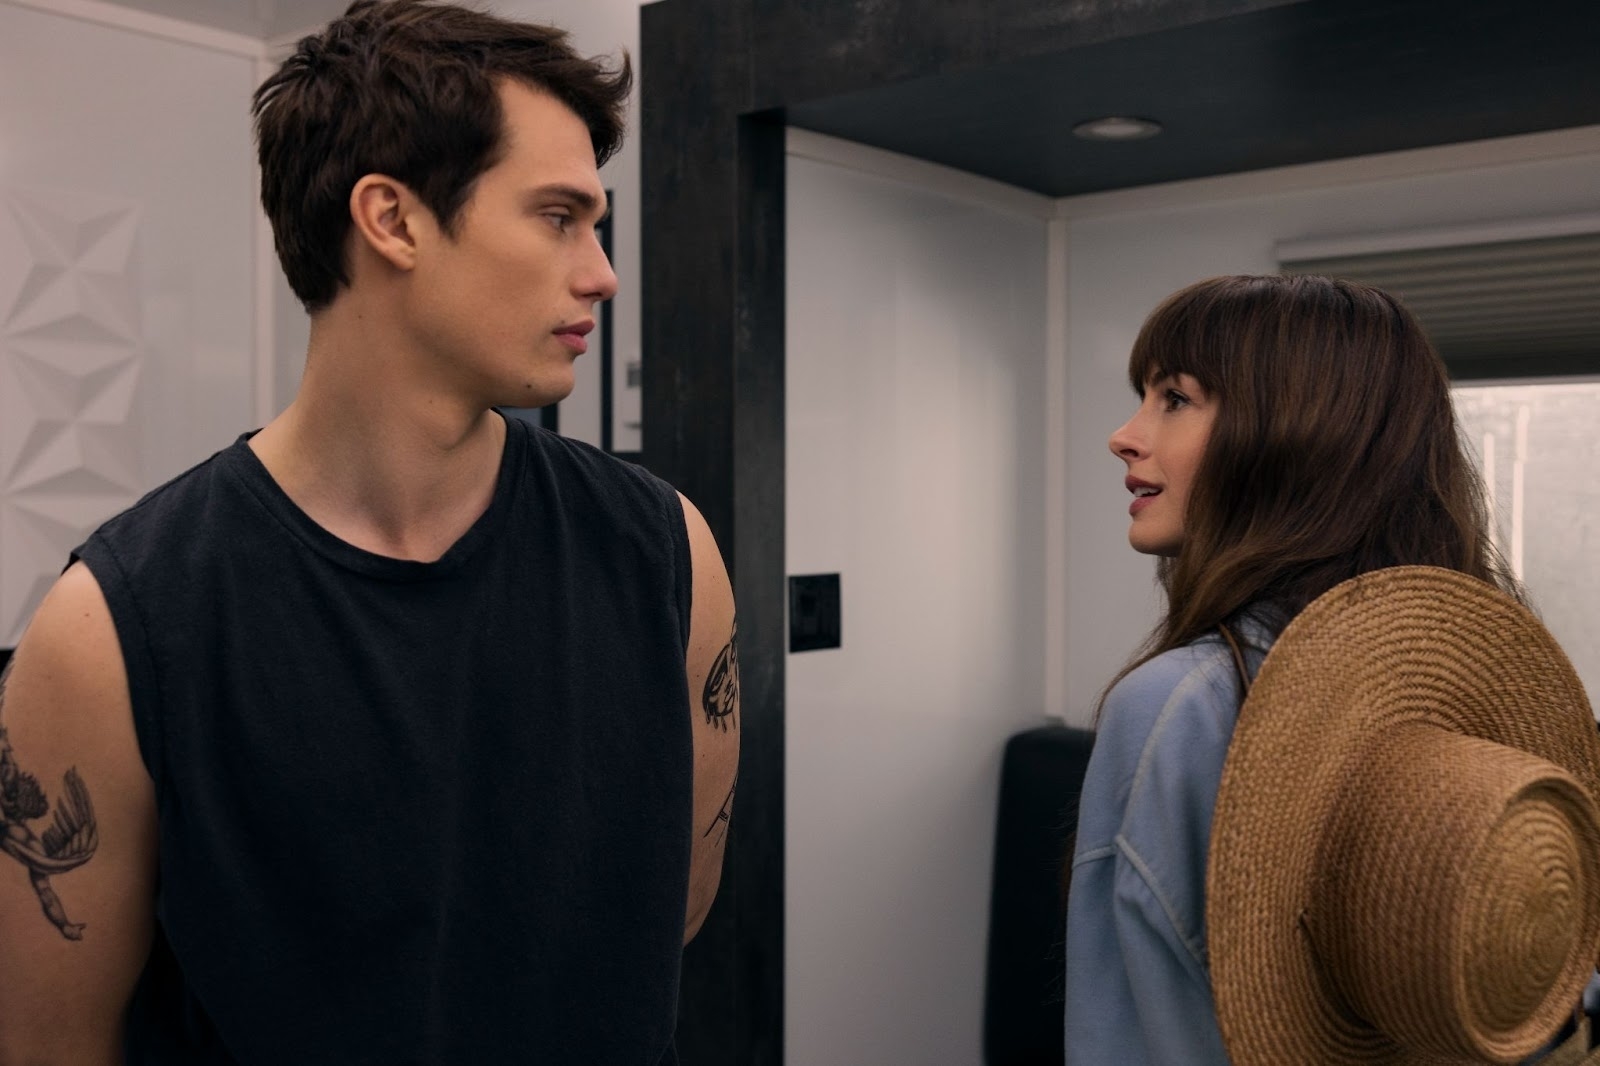 Solène and Hayes looking at each other as they stand in a room